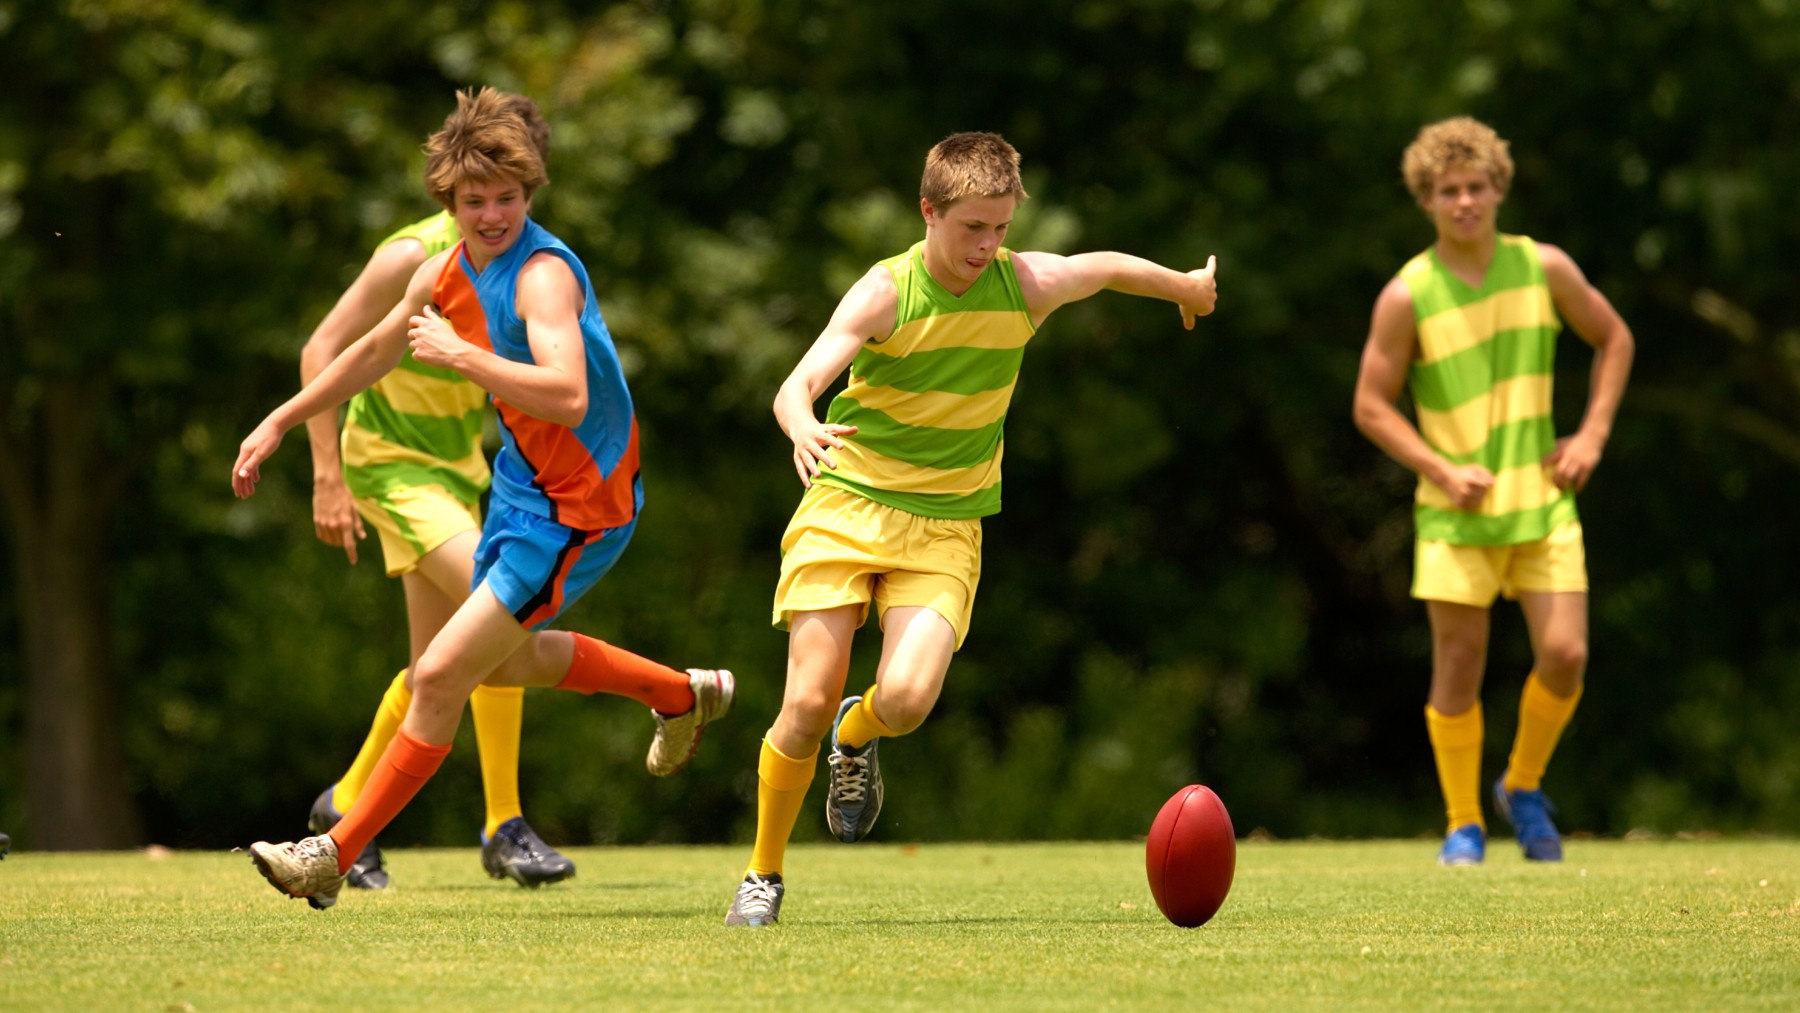 Footy is one of the most poplar organised sport among teenagers in Australia.